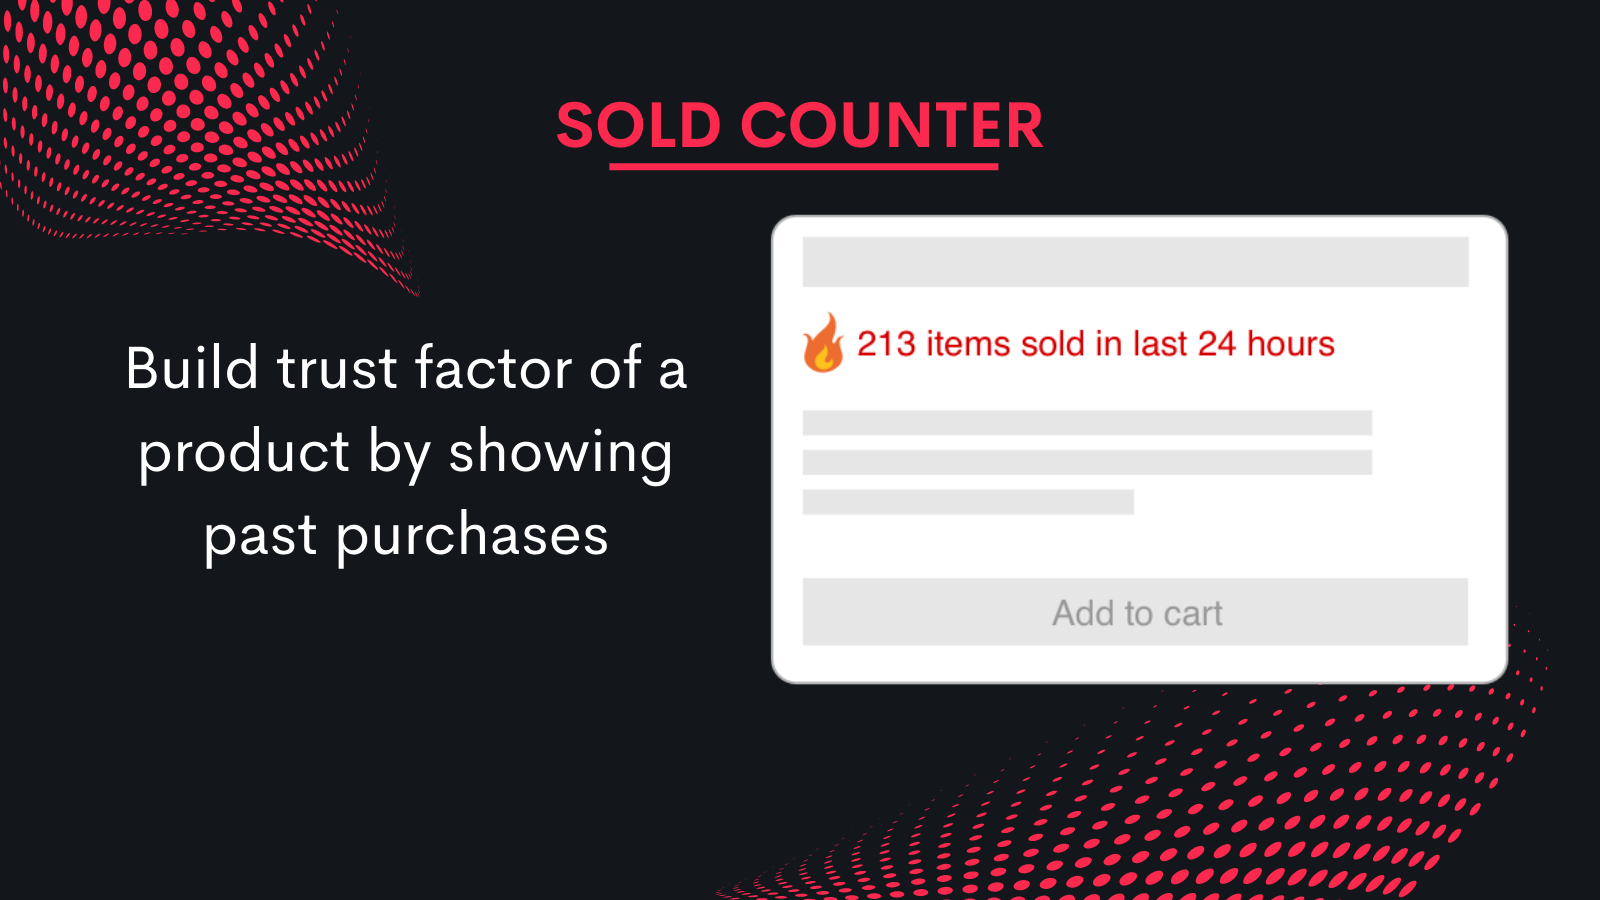 Avyya Modern Sales Booster - Sold Counter